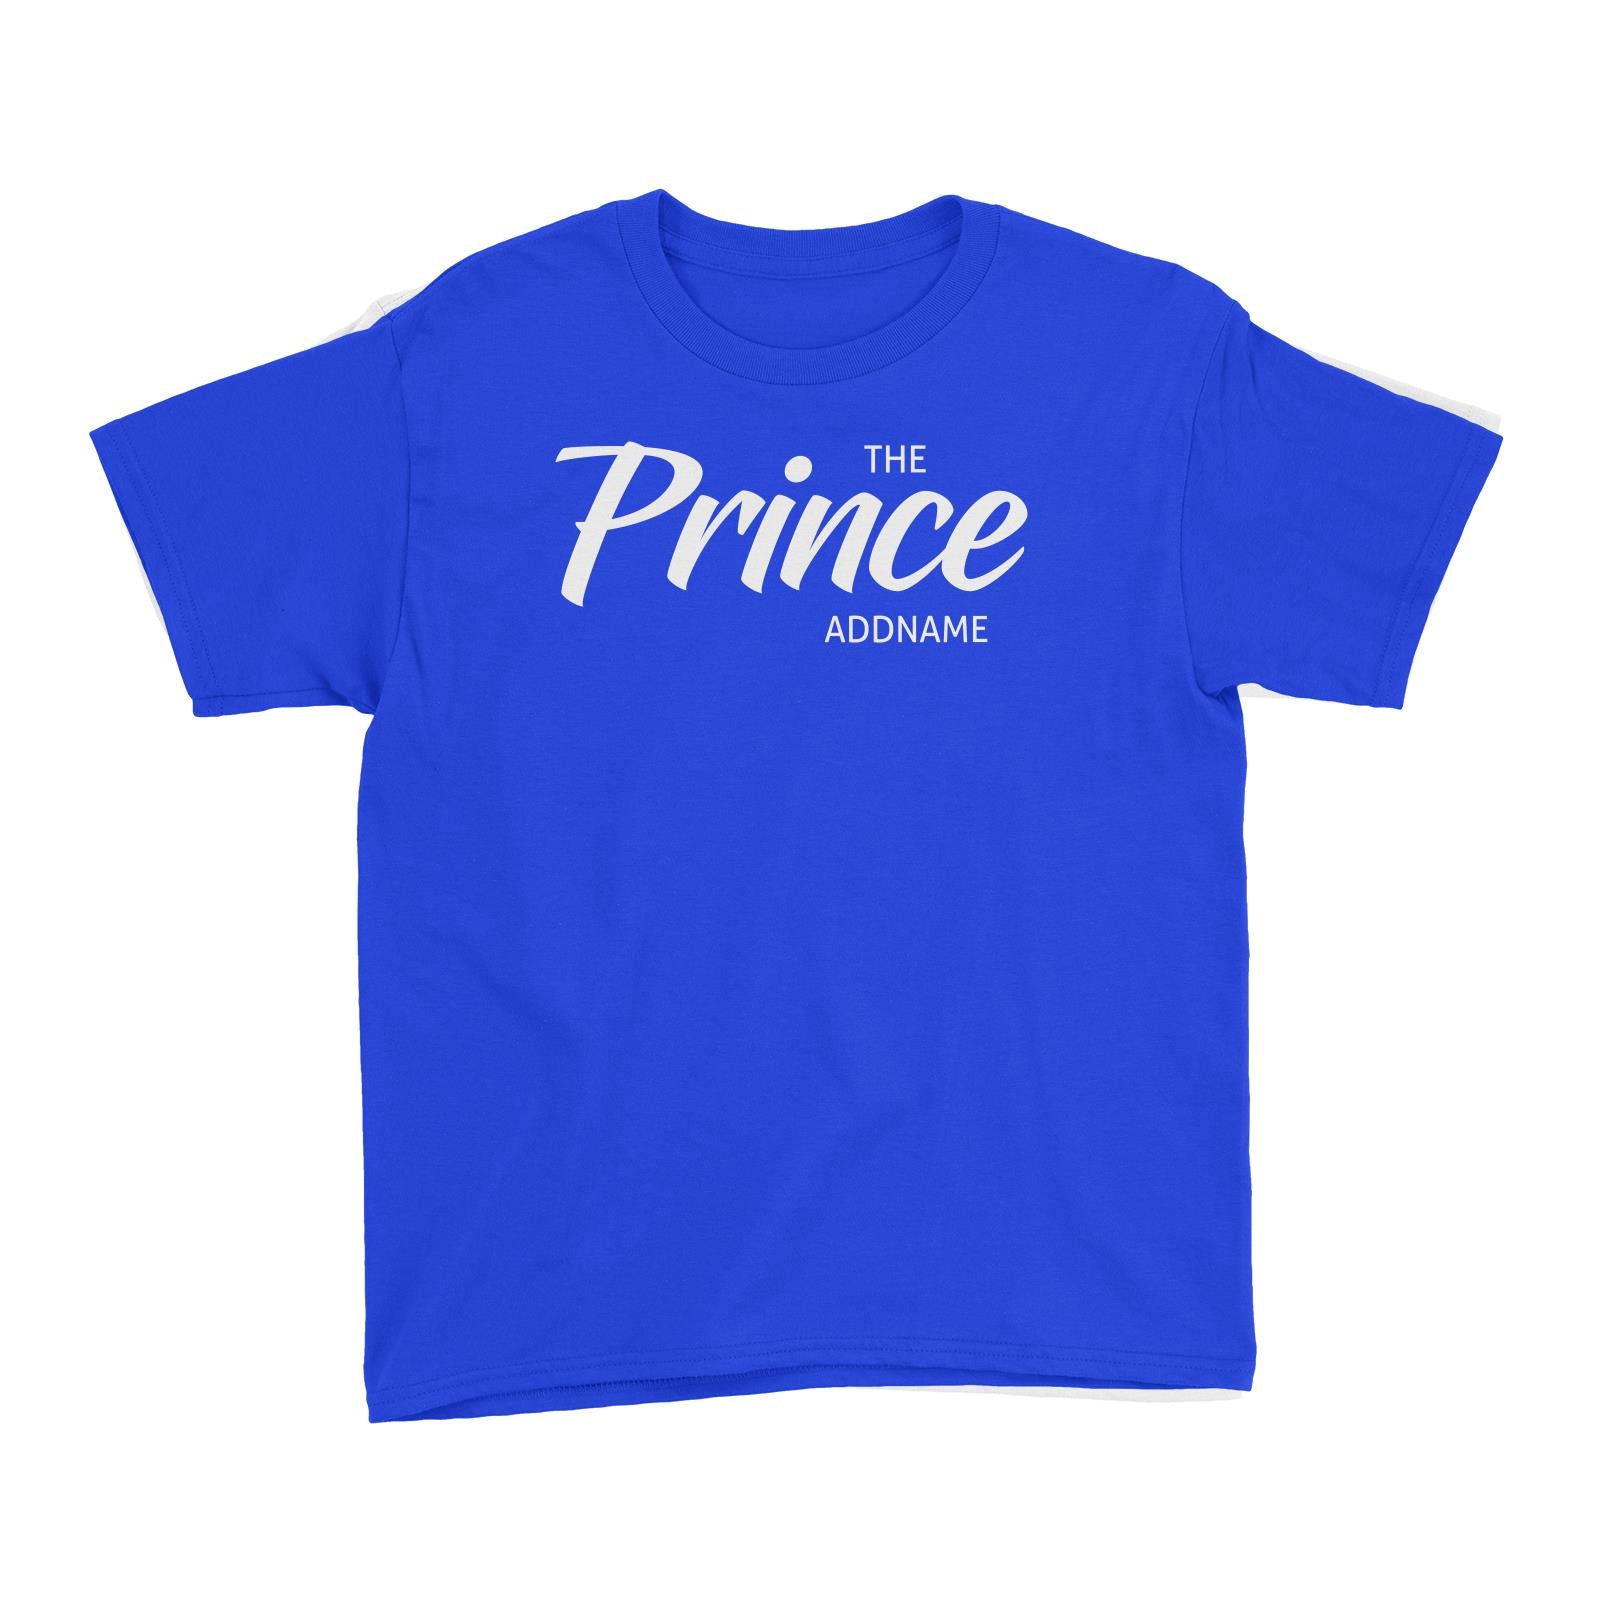 The Prince Addname Kid's T-Shirt Personalizable Designs Matching Family Royal Family Edition Royal Simple